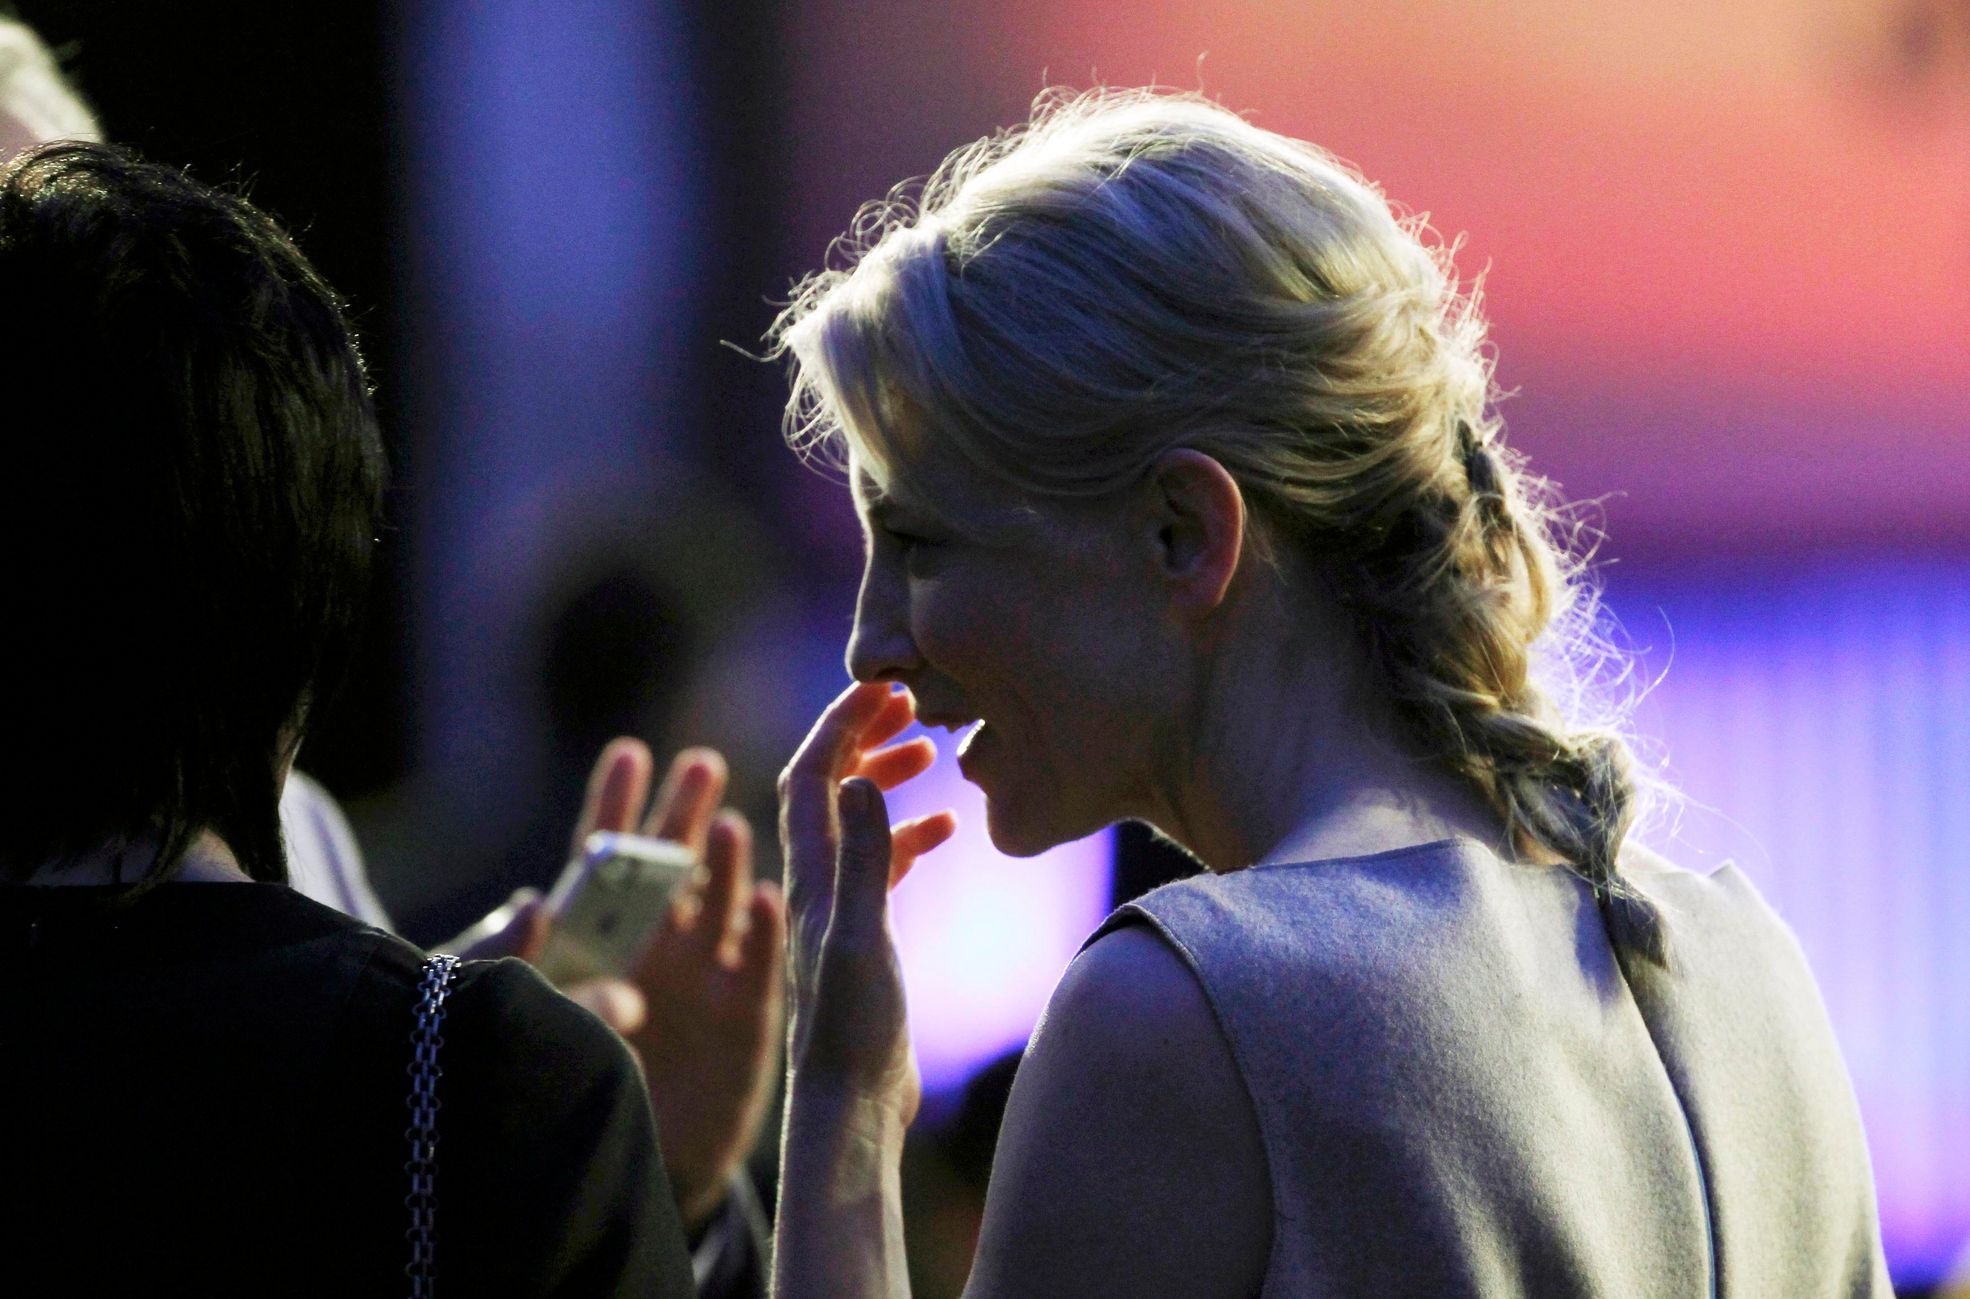 Best Female Lead nominee Cate Blanchett for the film &quot;Blue Jasmine&quot; talks with attendees before the start of the 2014 Film Independent Spirit Awards in Santa Monica